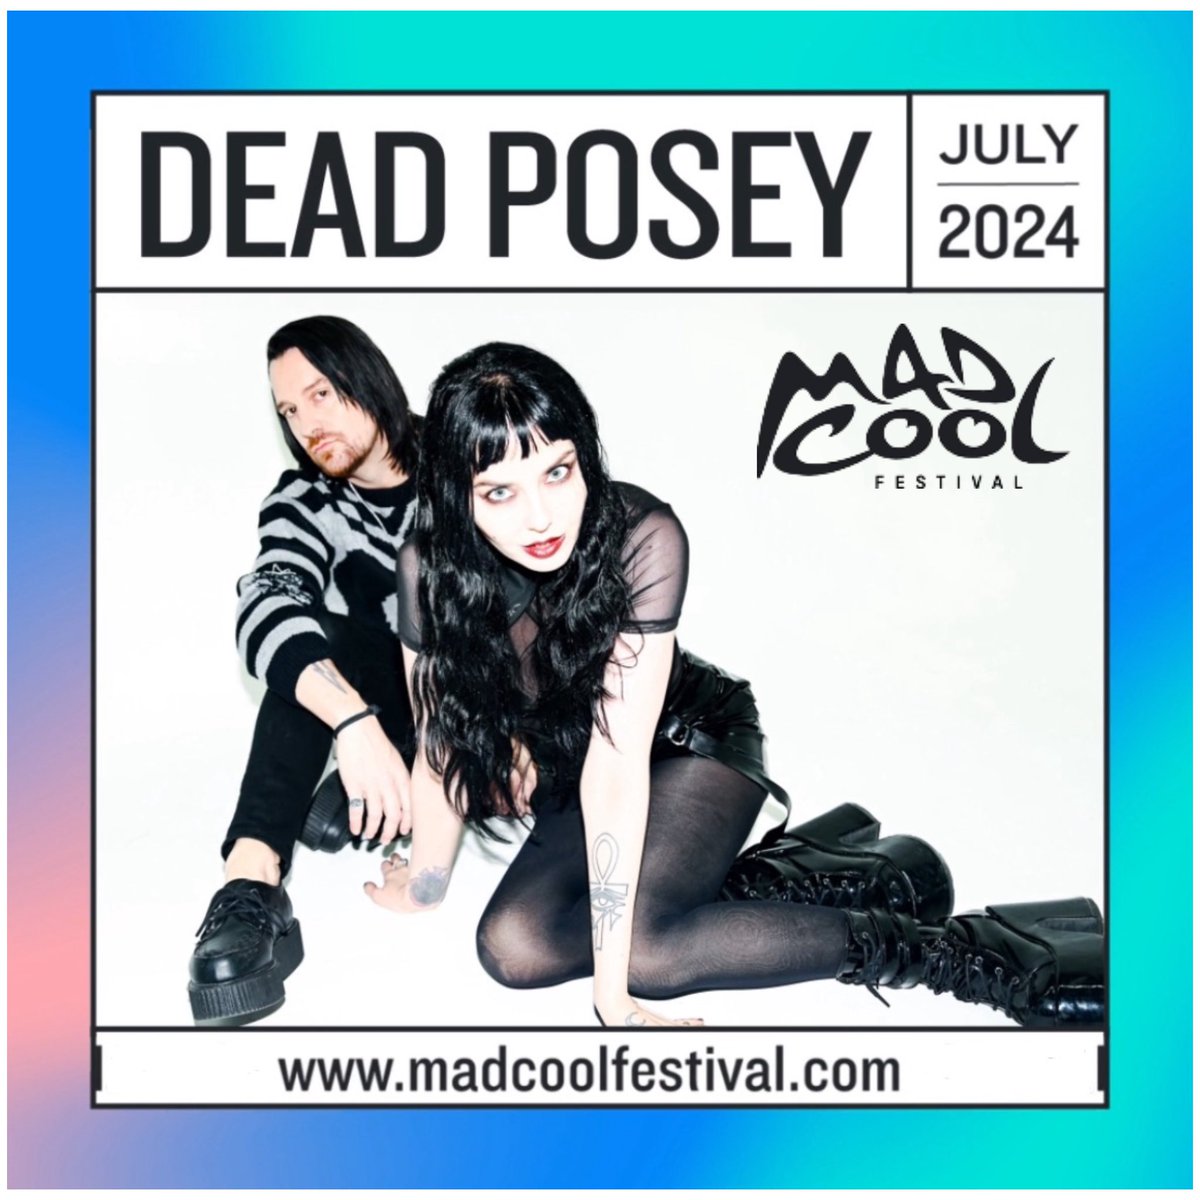 If you happen to find yourself in Madrid, Spain July 10, 2024 you know where to find us! 🦇 

Tickets: deadposey.com/tour

#deadposey #madcool2024 #spain #madrid #madcoolfestival